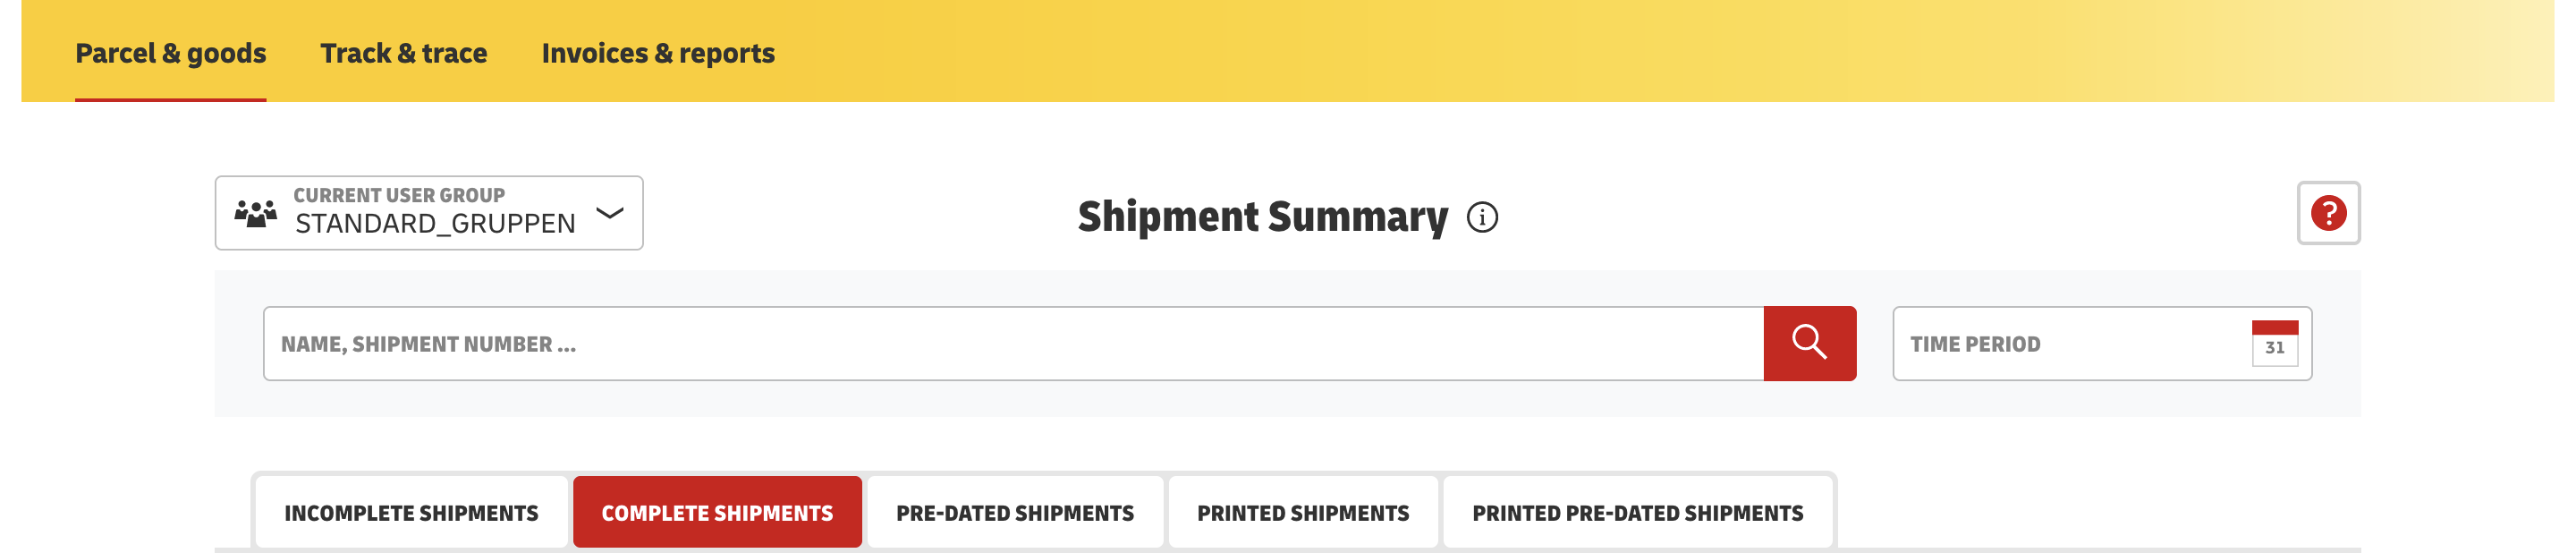 dhl_completeshipments.png